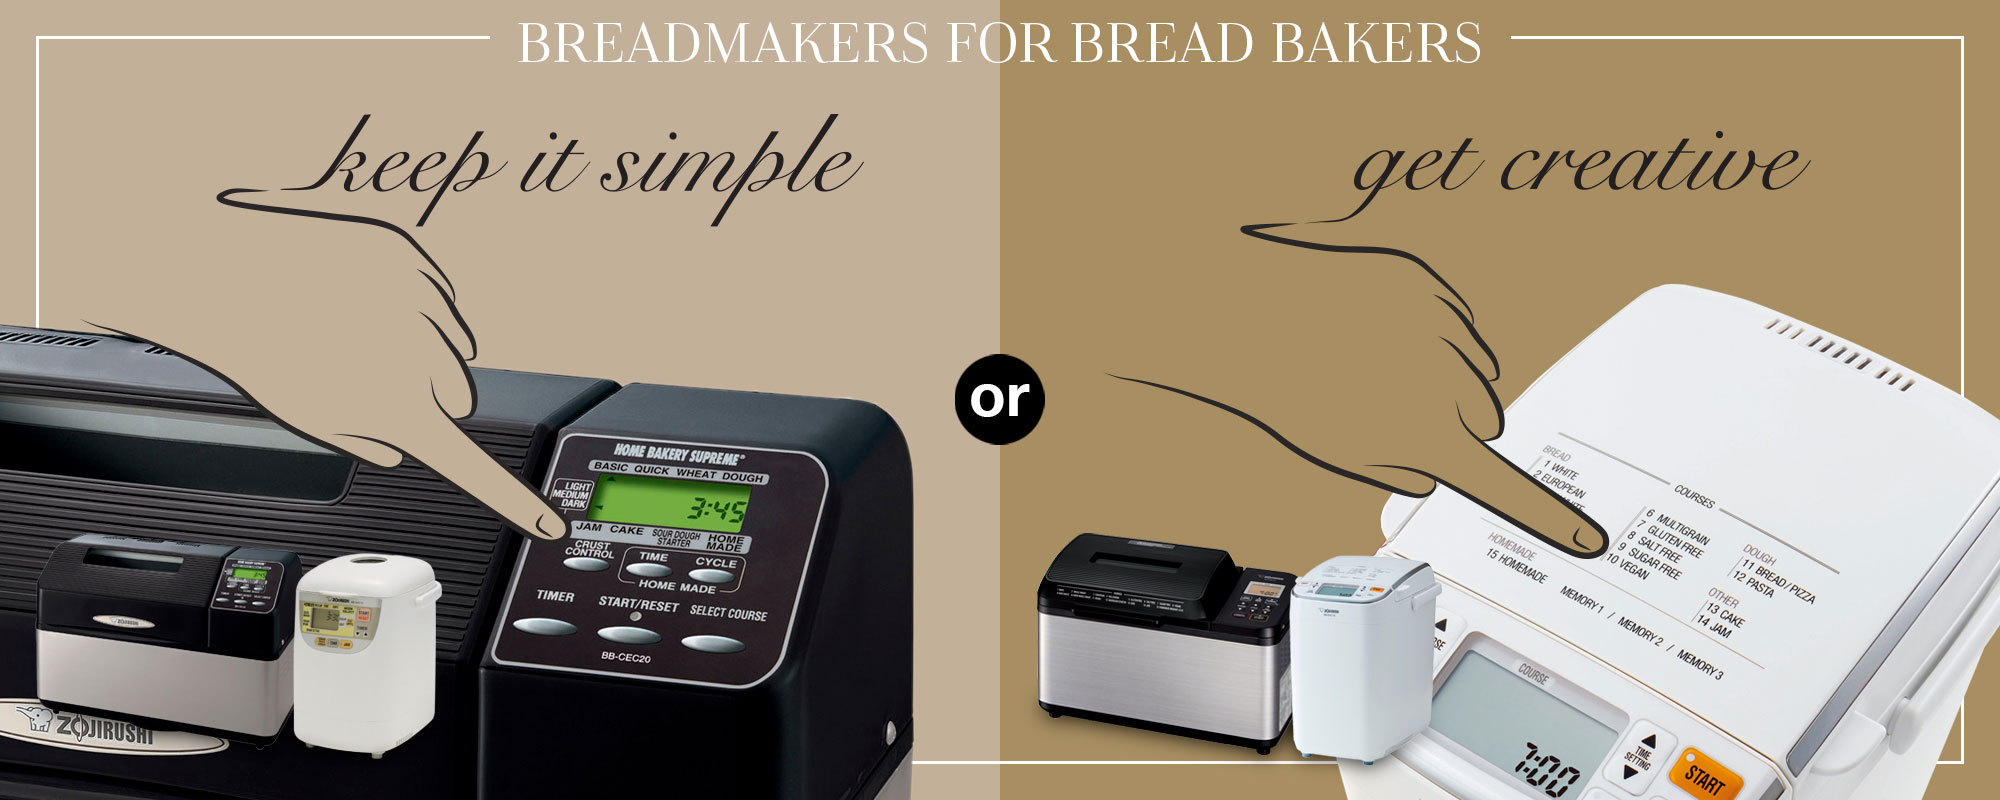 Breadmakers For Bread Bakers